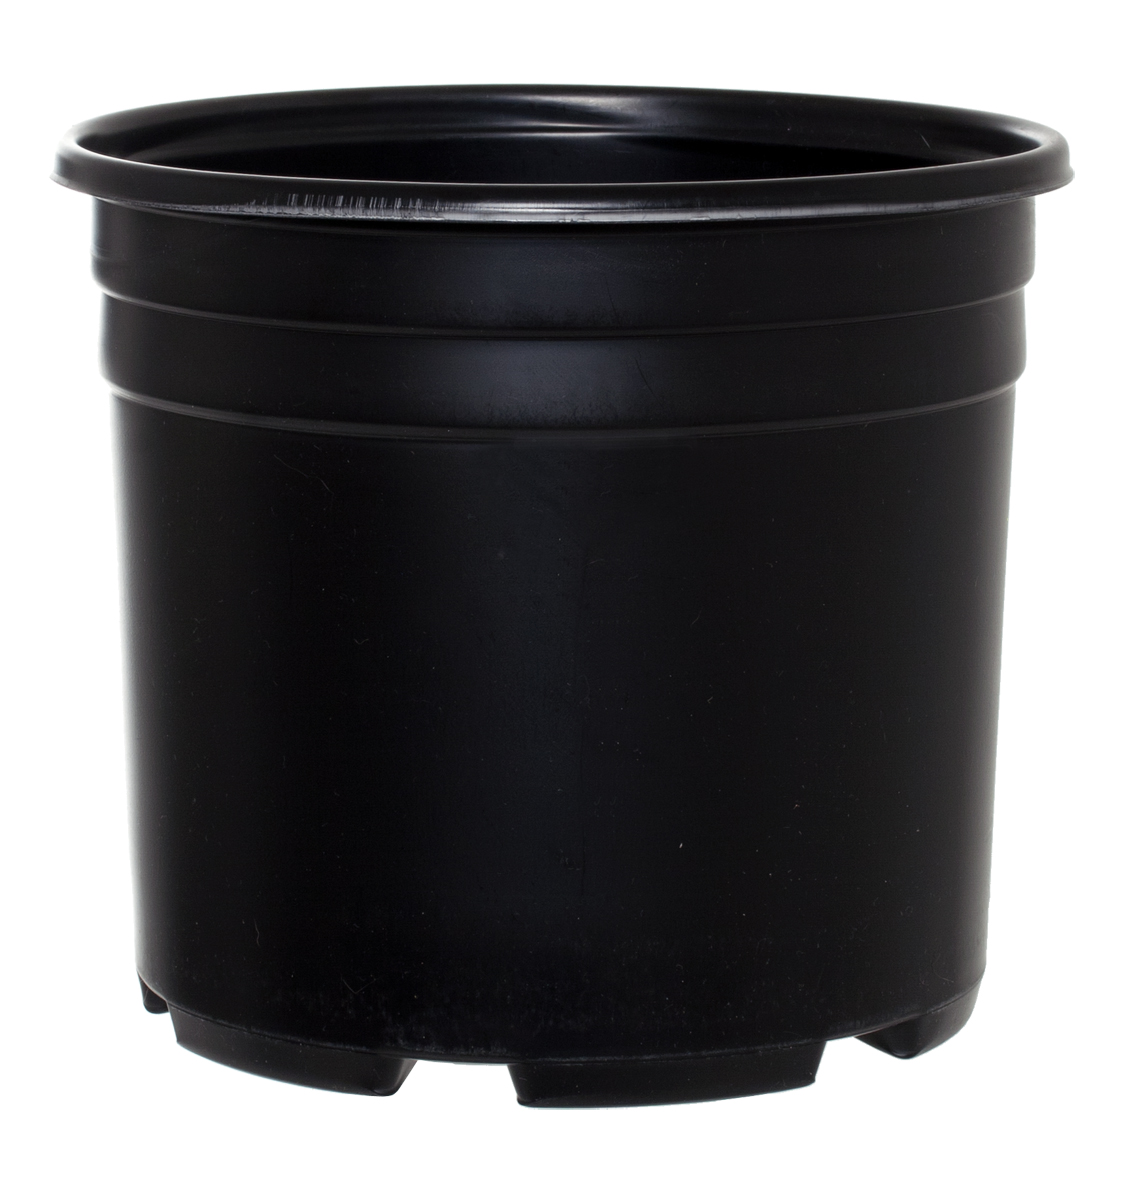 Picture for Pro Cal Thermo Pot, Squat, 3 gal